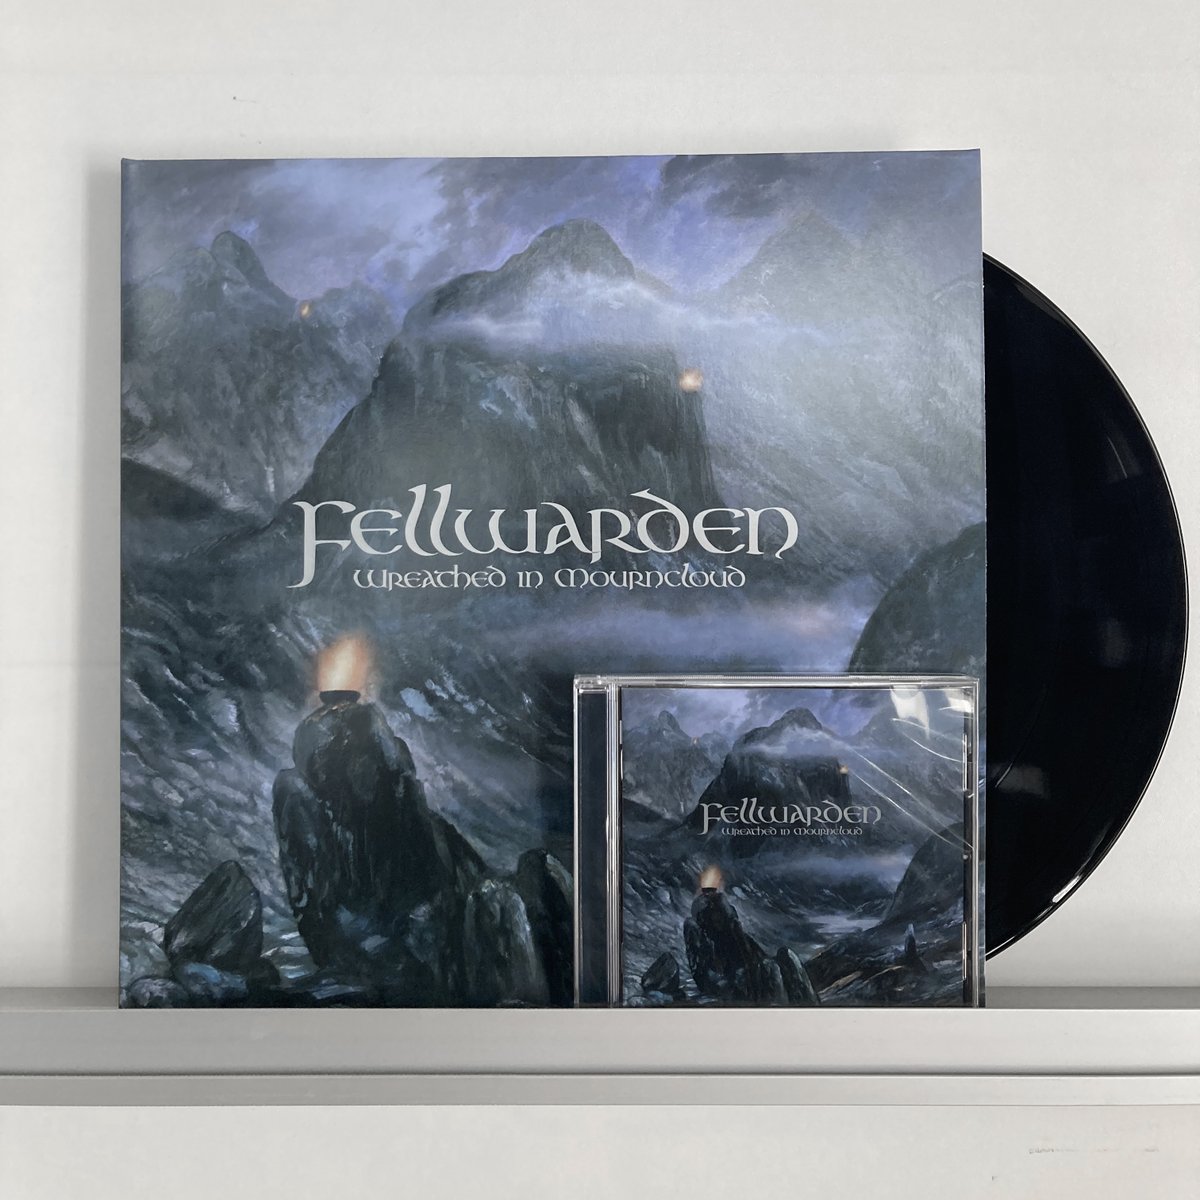 RECORD OF THE WEEK Fellwarden 'Wreathed in Mourncloud' Get it now as a classic CD or Gatefold 180g vinyl for a special reduced price until Sunday July 2nd: ffm.bio/fellwarden #blackmetal #metal #heavymetal #vinyl #cd #Audio #collectors #compactdisc #epicmetal #ukmetal